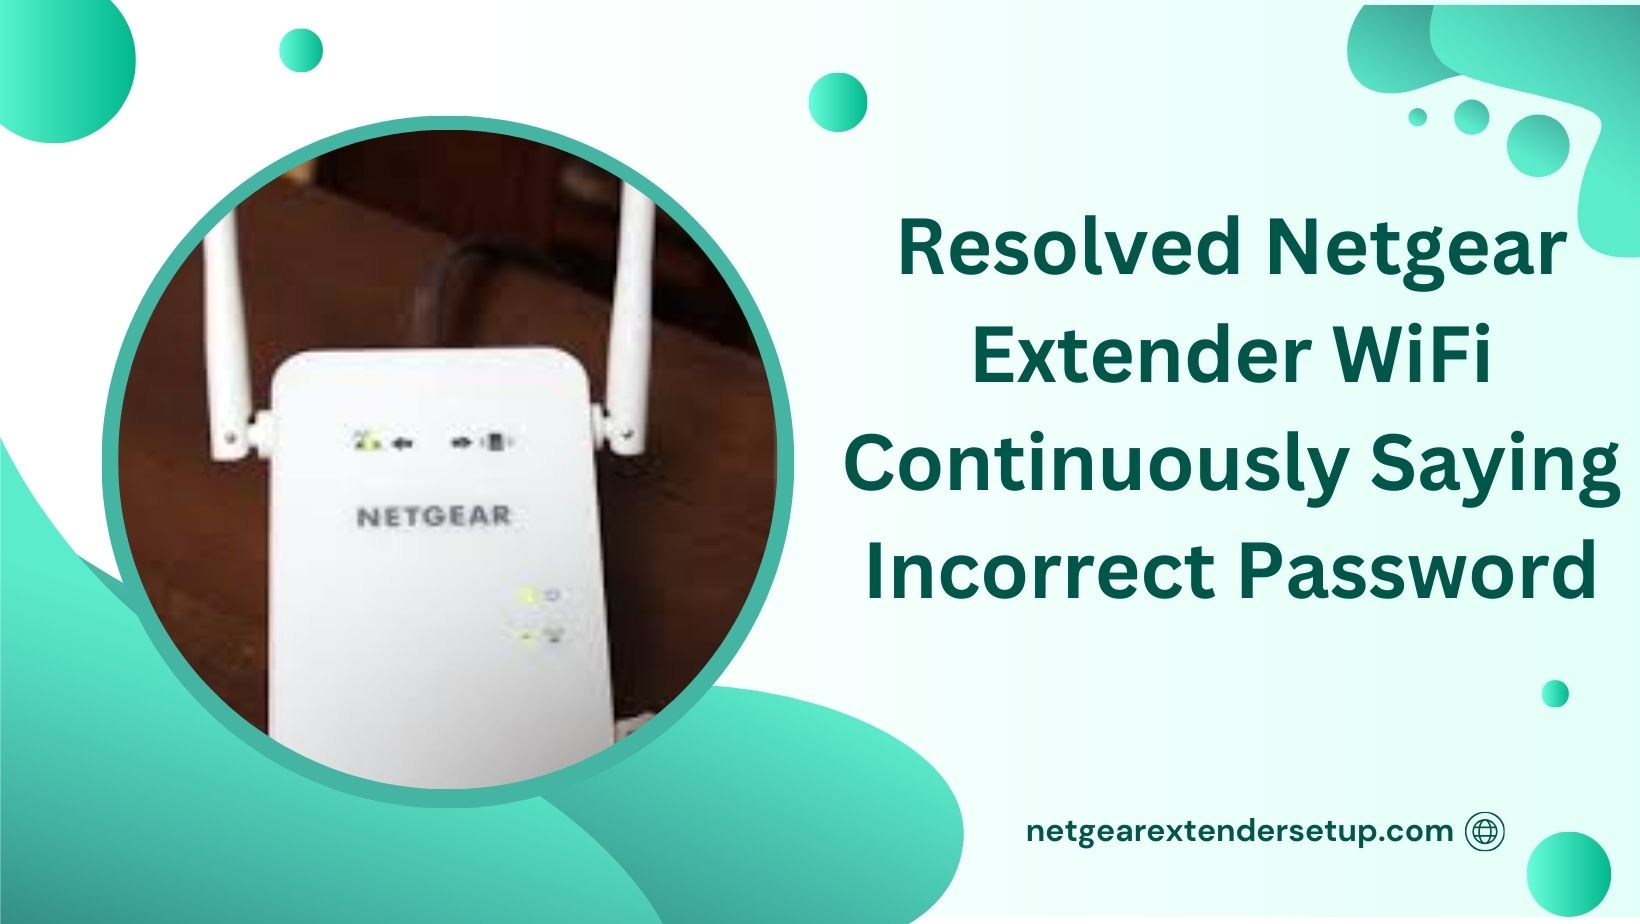 You are currently viewing Resolved Netgear Extender WiFi Continuously Saying Incorrect Password